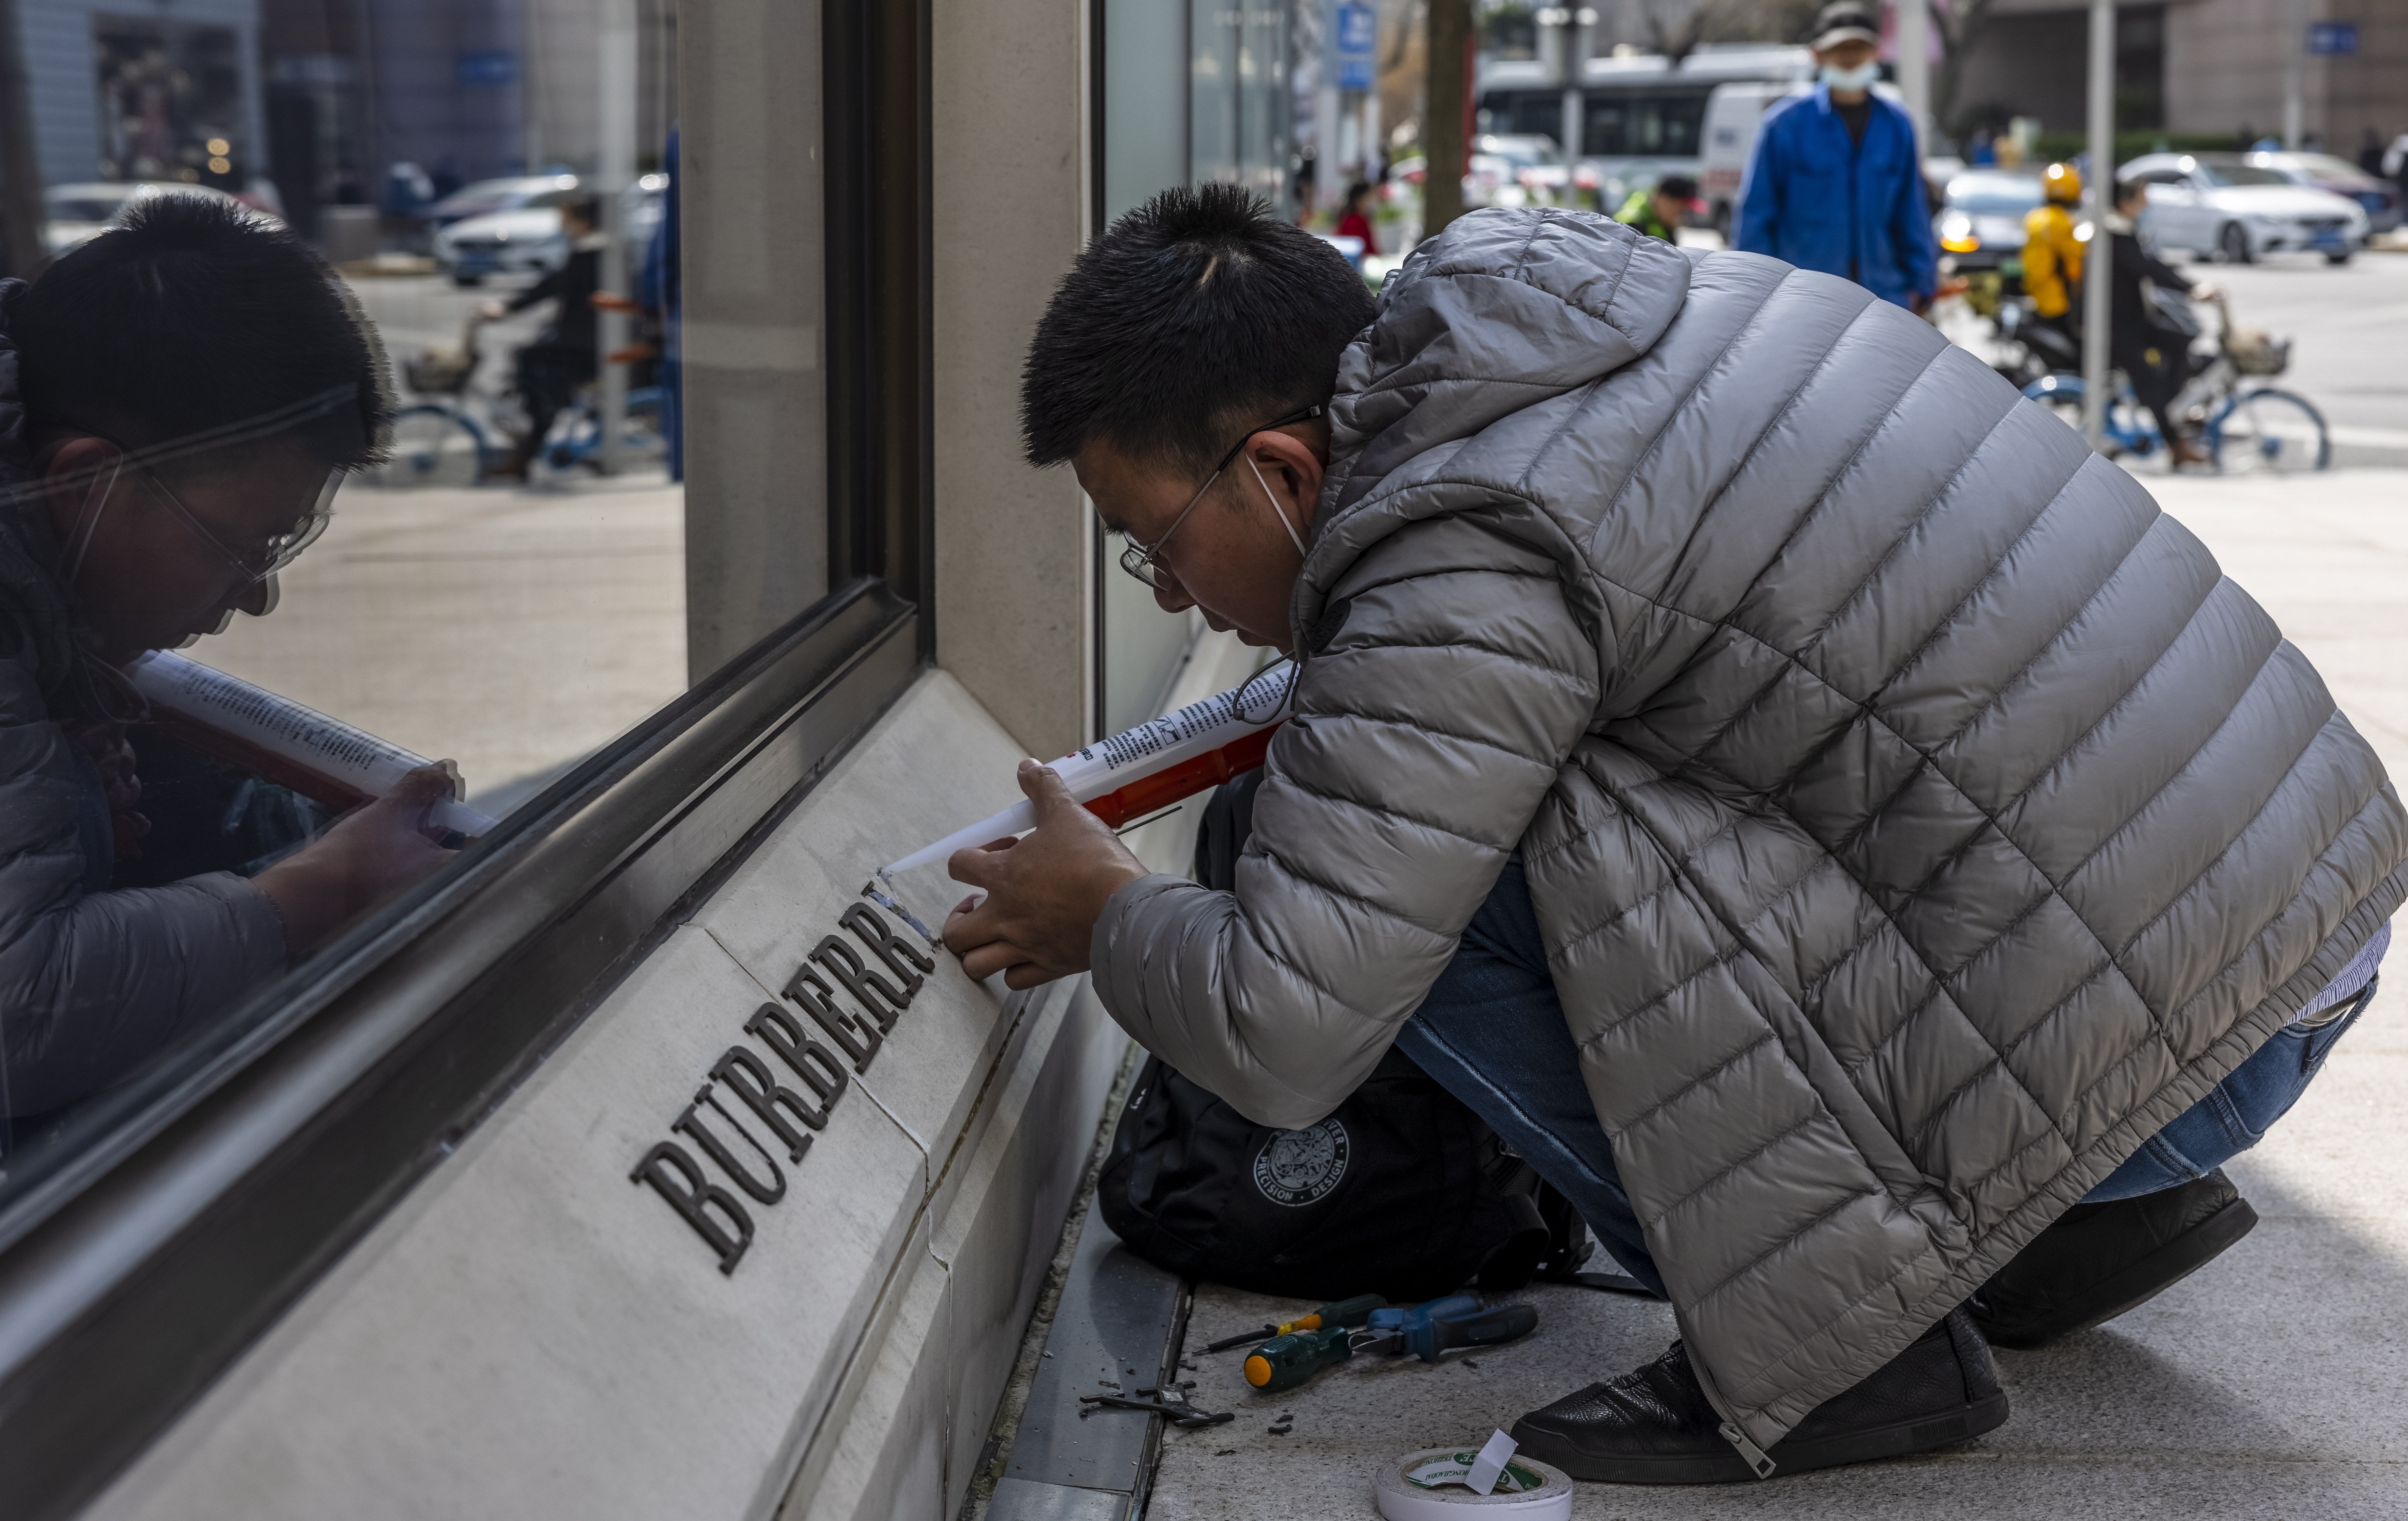 A man repairs a damaged logo in front of the Burberry store in Shanghai on March 26. Burberry,  Fila, Hugo Boss, H&M, Nike and Adidas have been targeted for refusing to buy Xinjiang cotton over concerns of forced labour in the region.  Photo: EPA-EFE